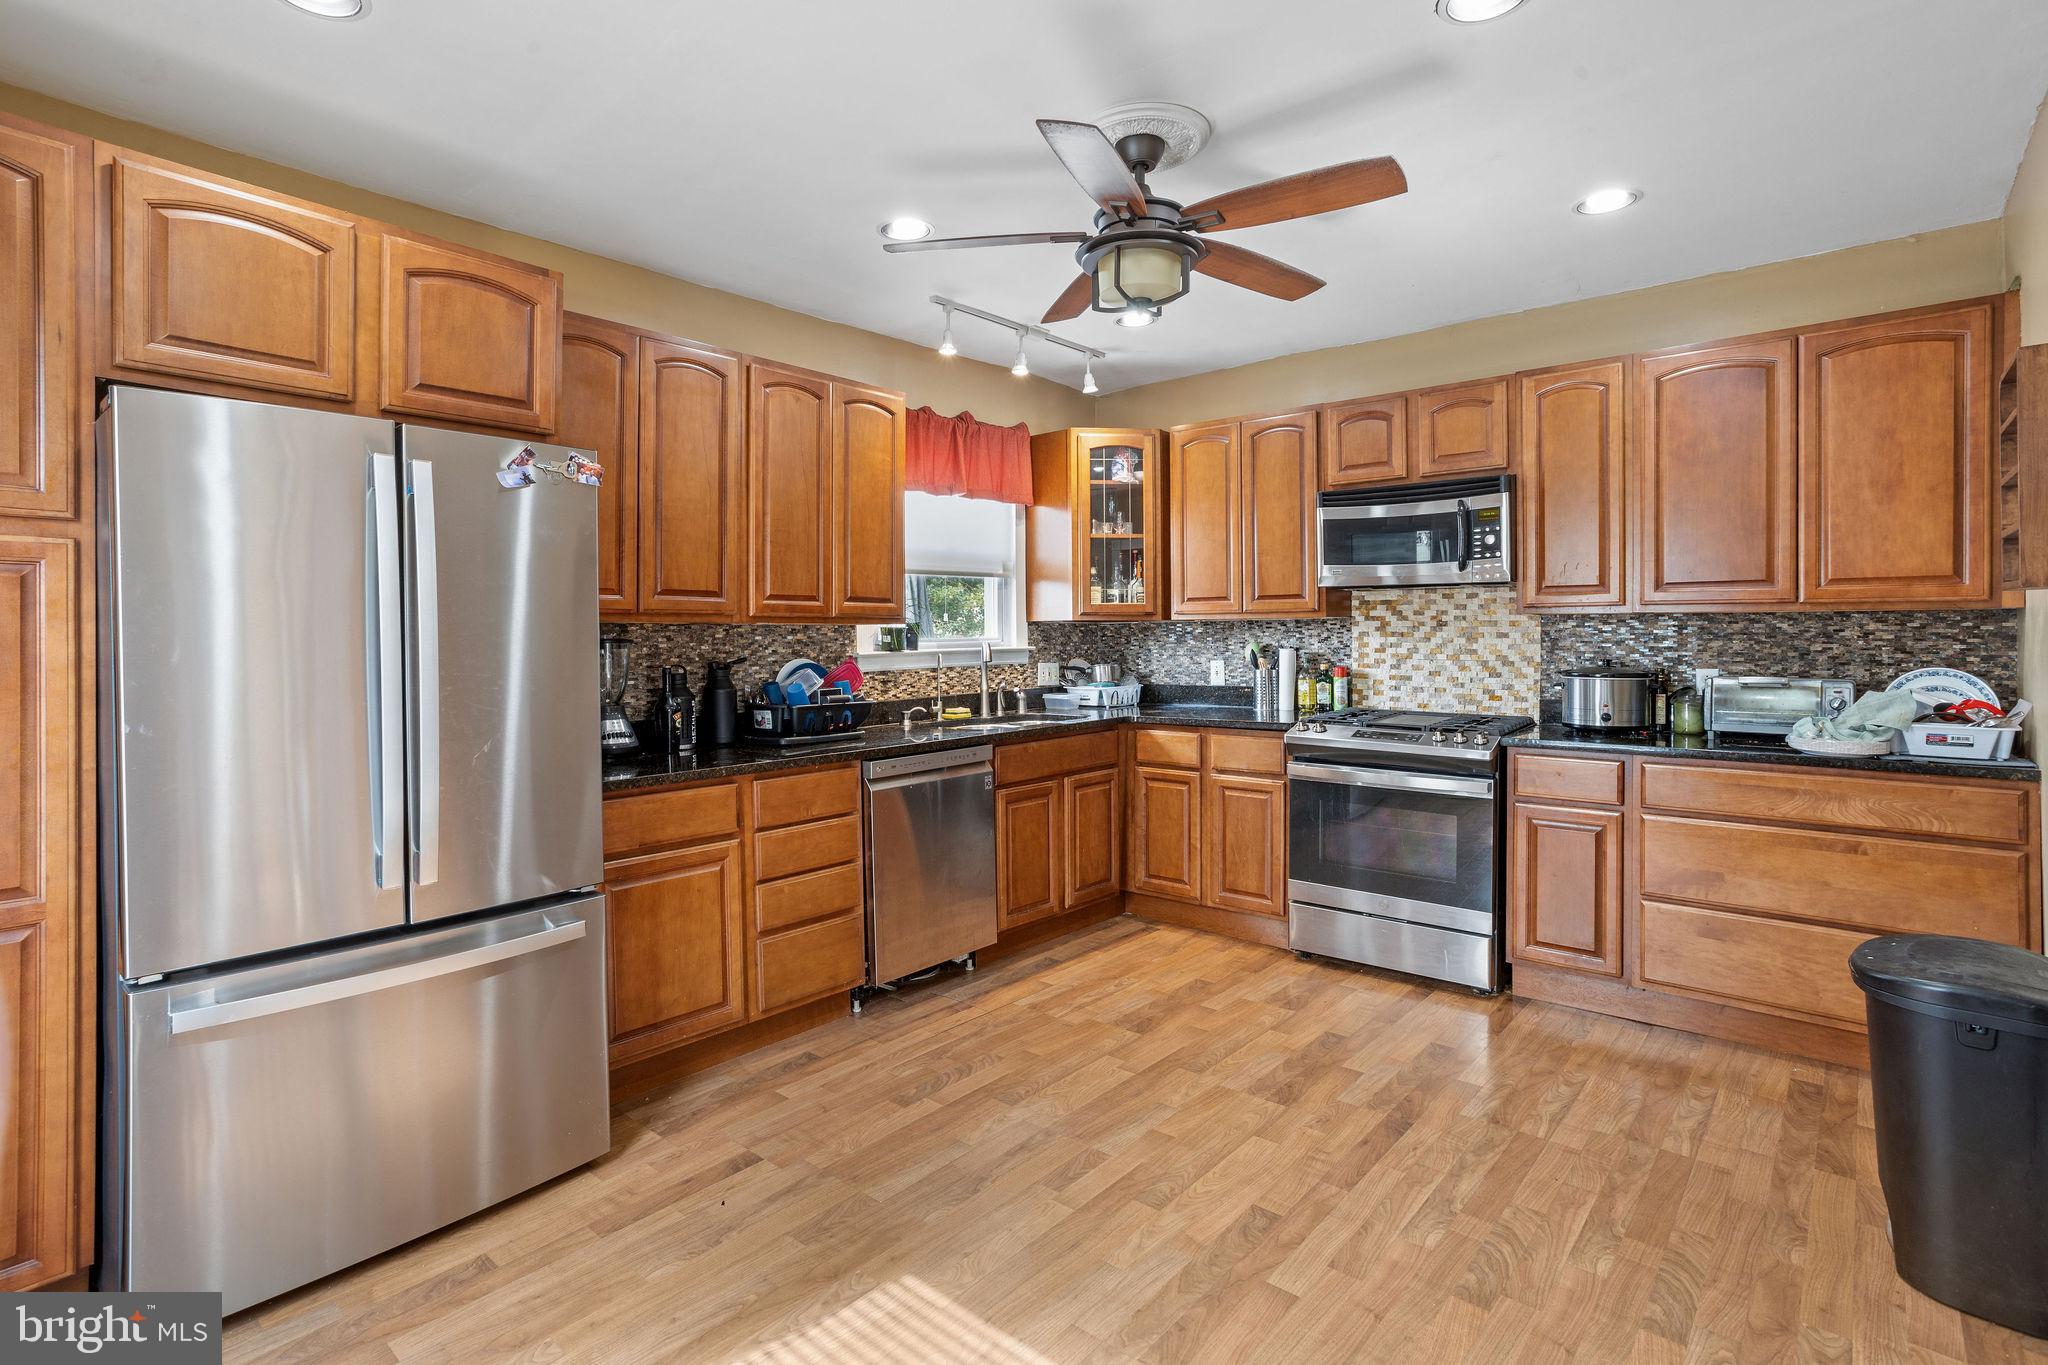 a kitchen with kitchen island granite countertop wooden floors stainless steel appliances and window